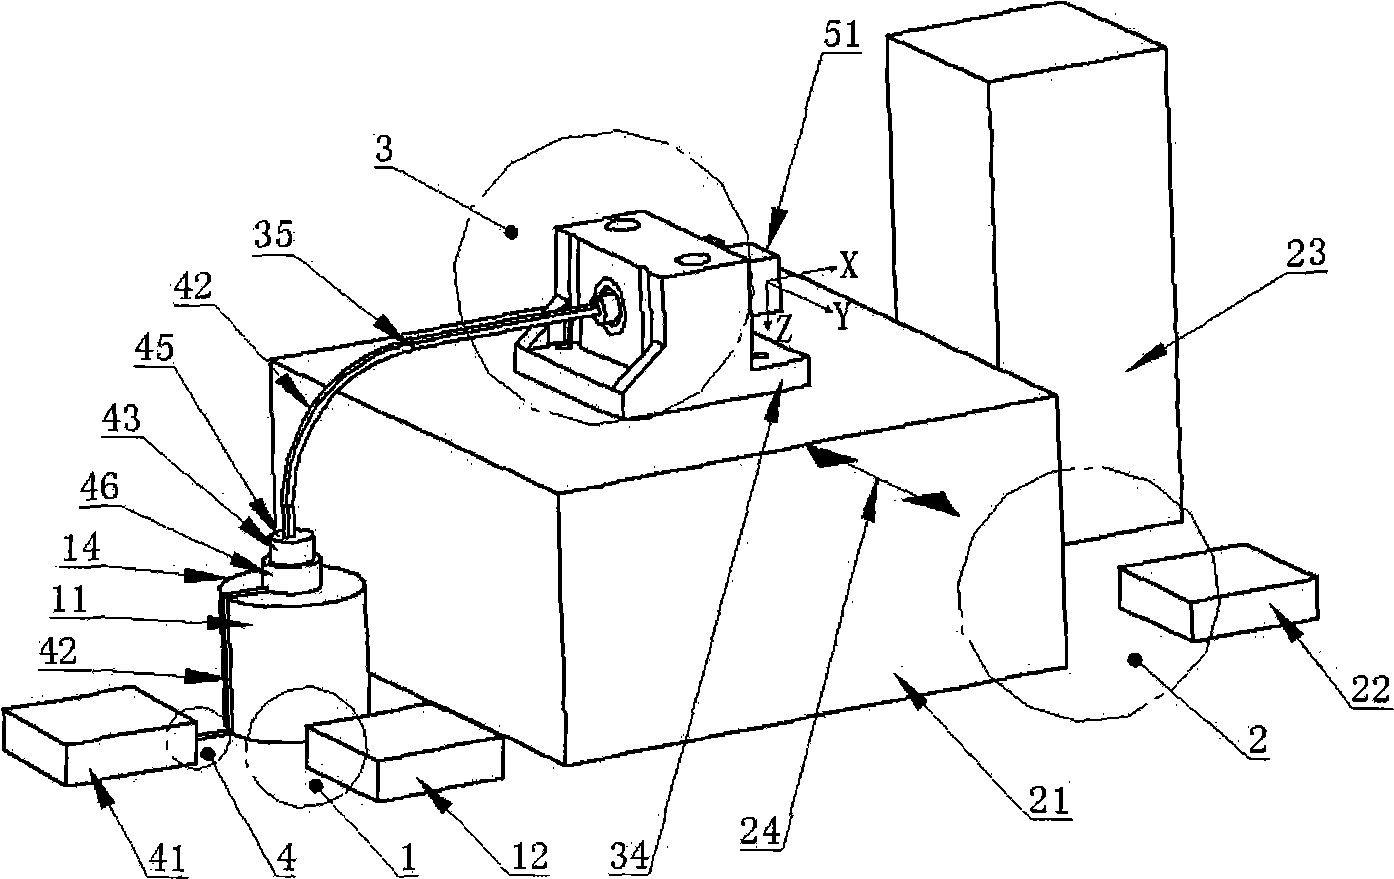 System for testing rotation and vibration performance of inertia device